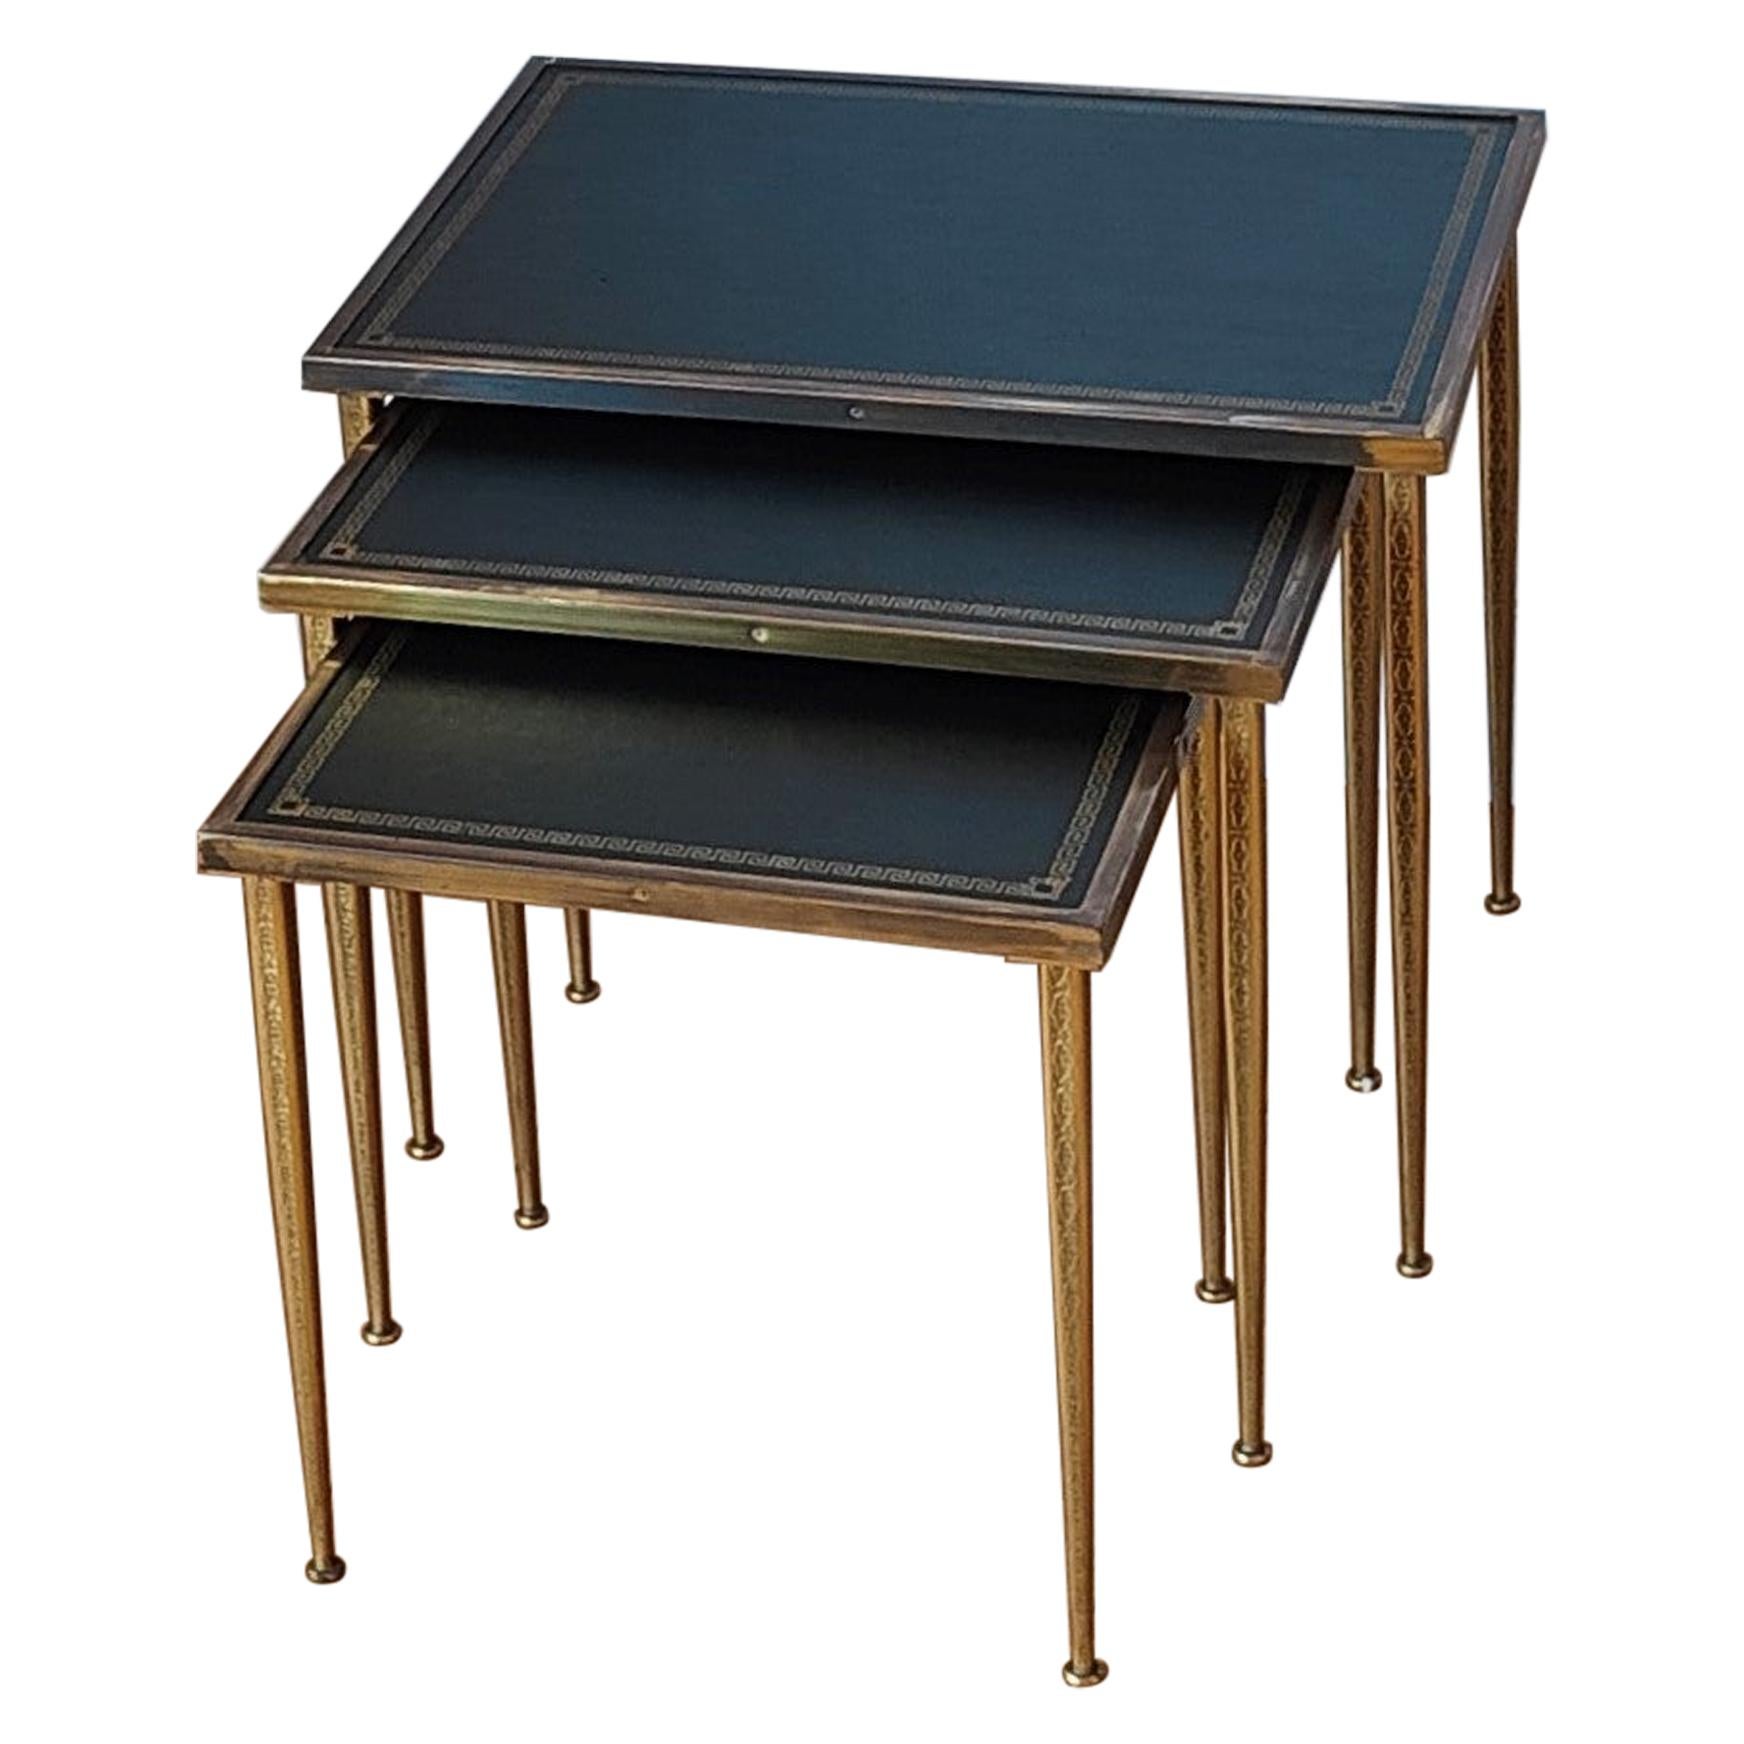 Stacking tables in the style of Jansen
Feet are elegantly engraved and in very good vintage condition
Leather top is also in good vintage condition and feature gold color frise on the rim
these tables will ship from France
Price does not include